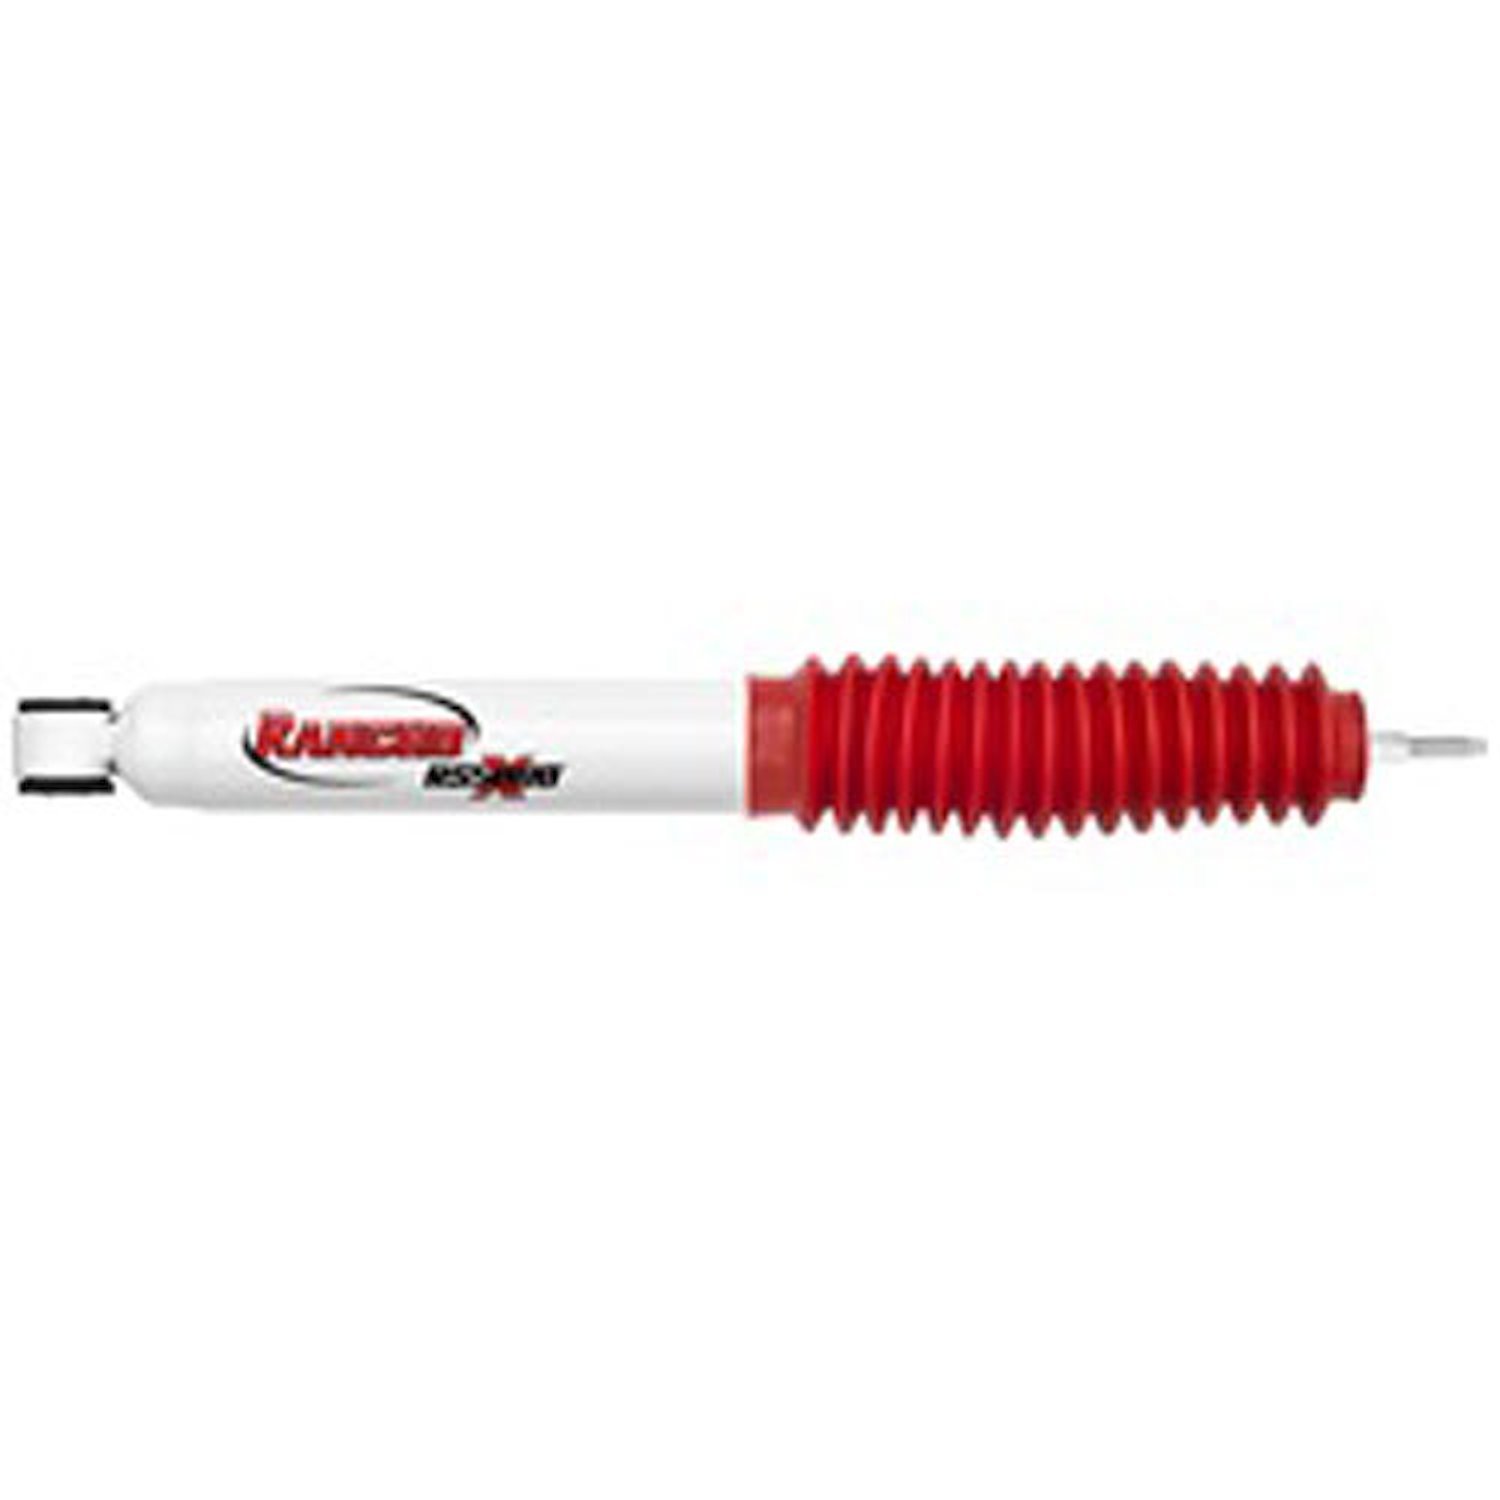 RS5000X Front Shock Absorber Fits Ford F250 and